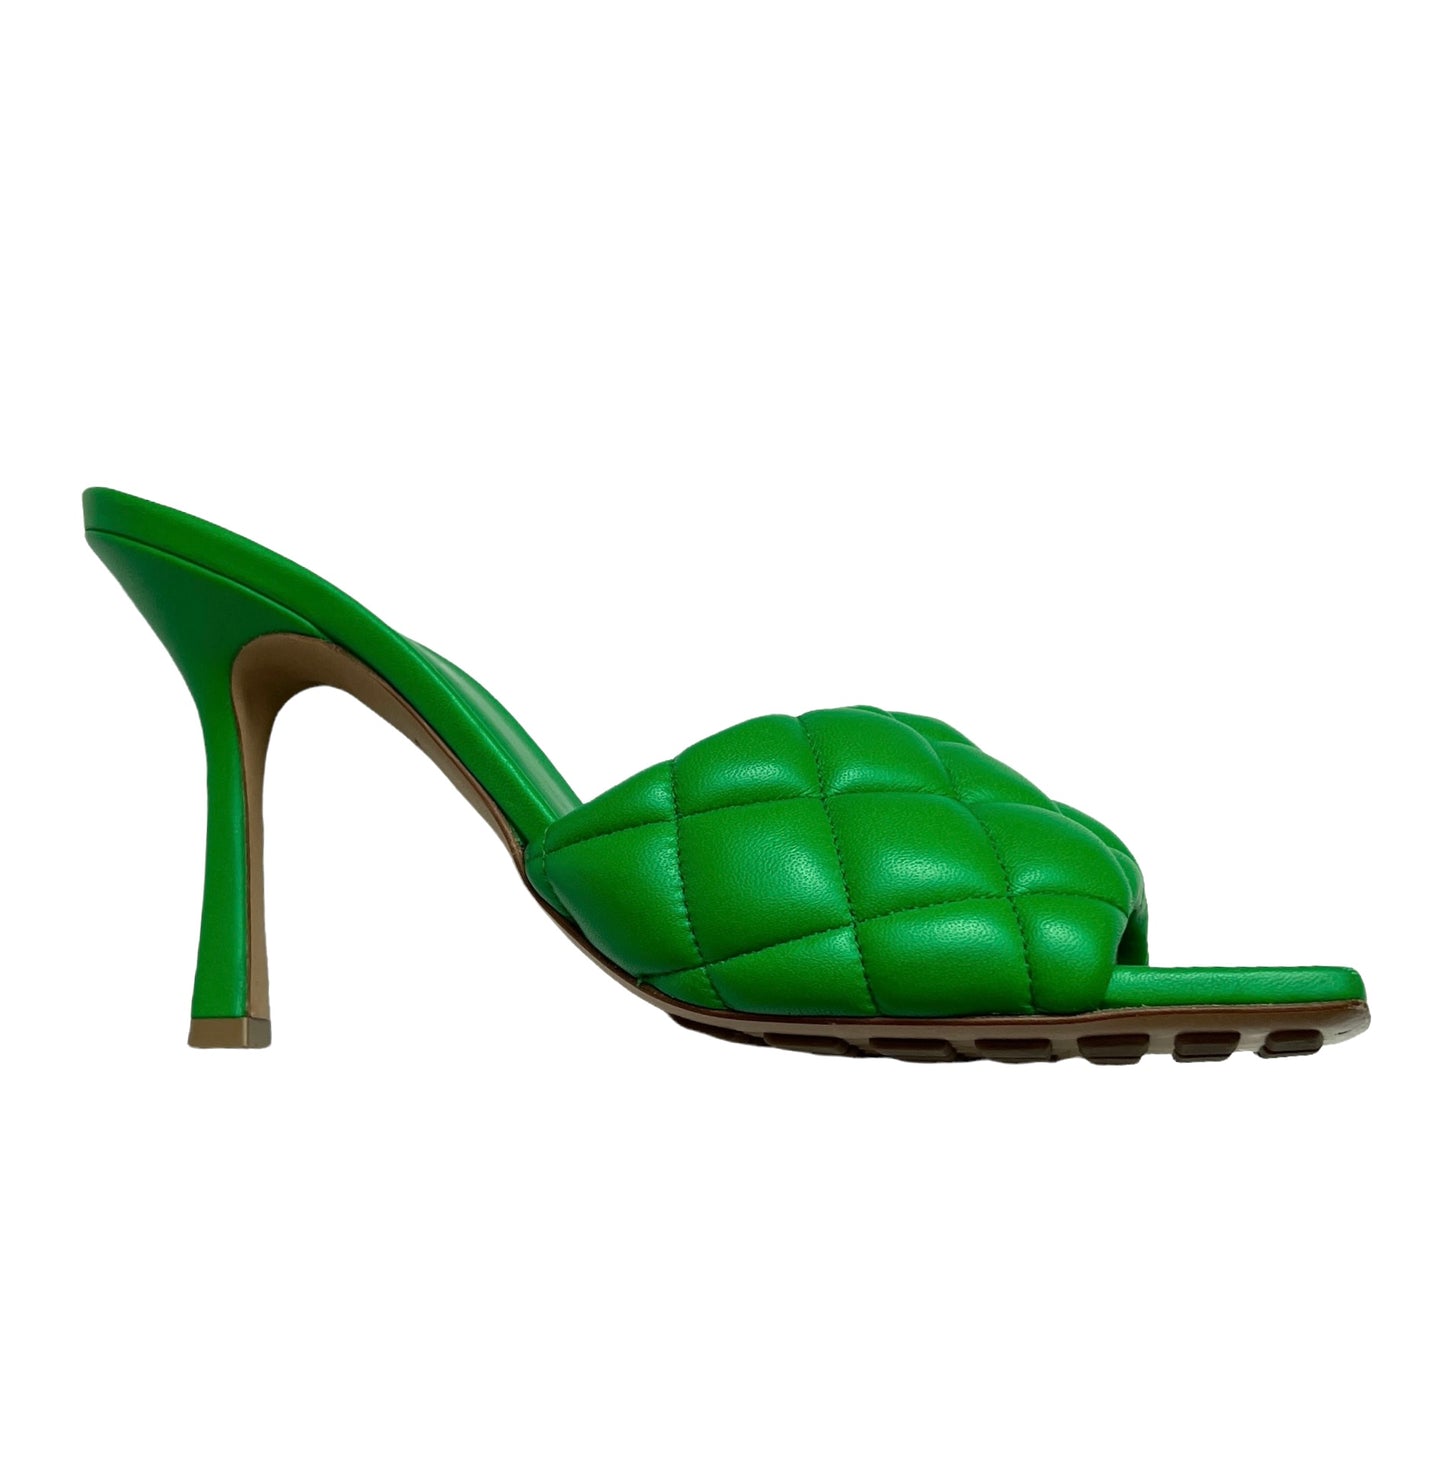 Green Slides with Heels - 8